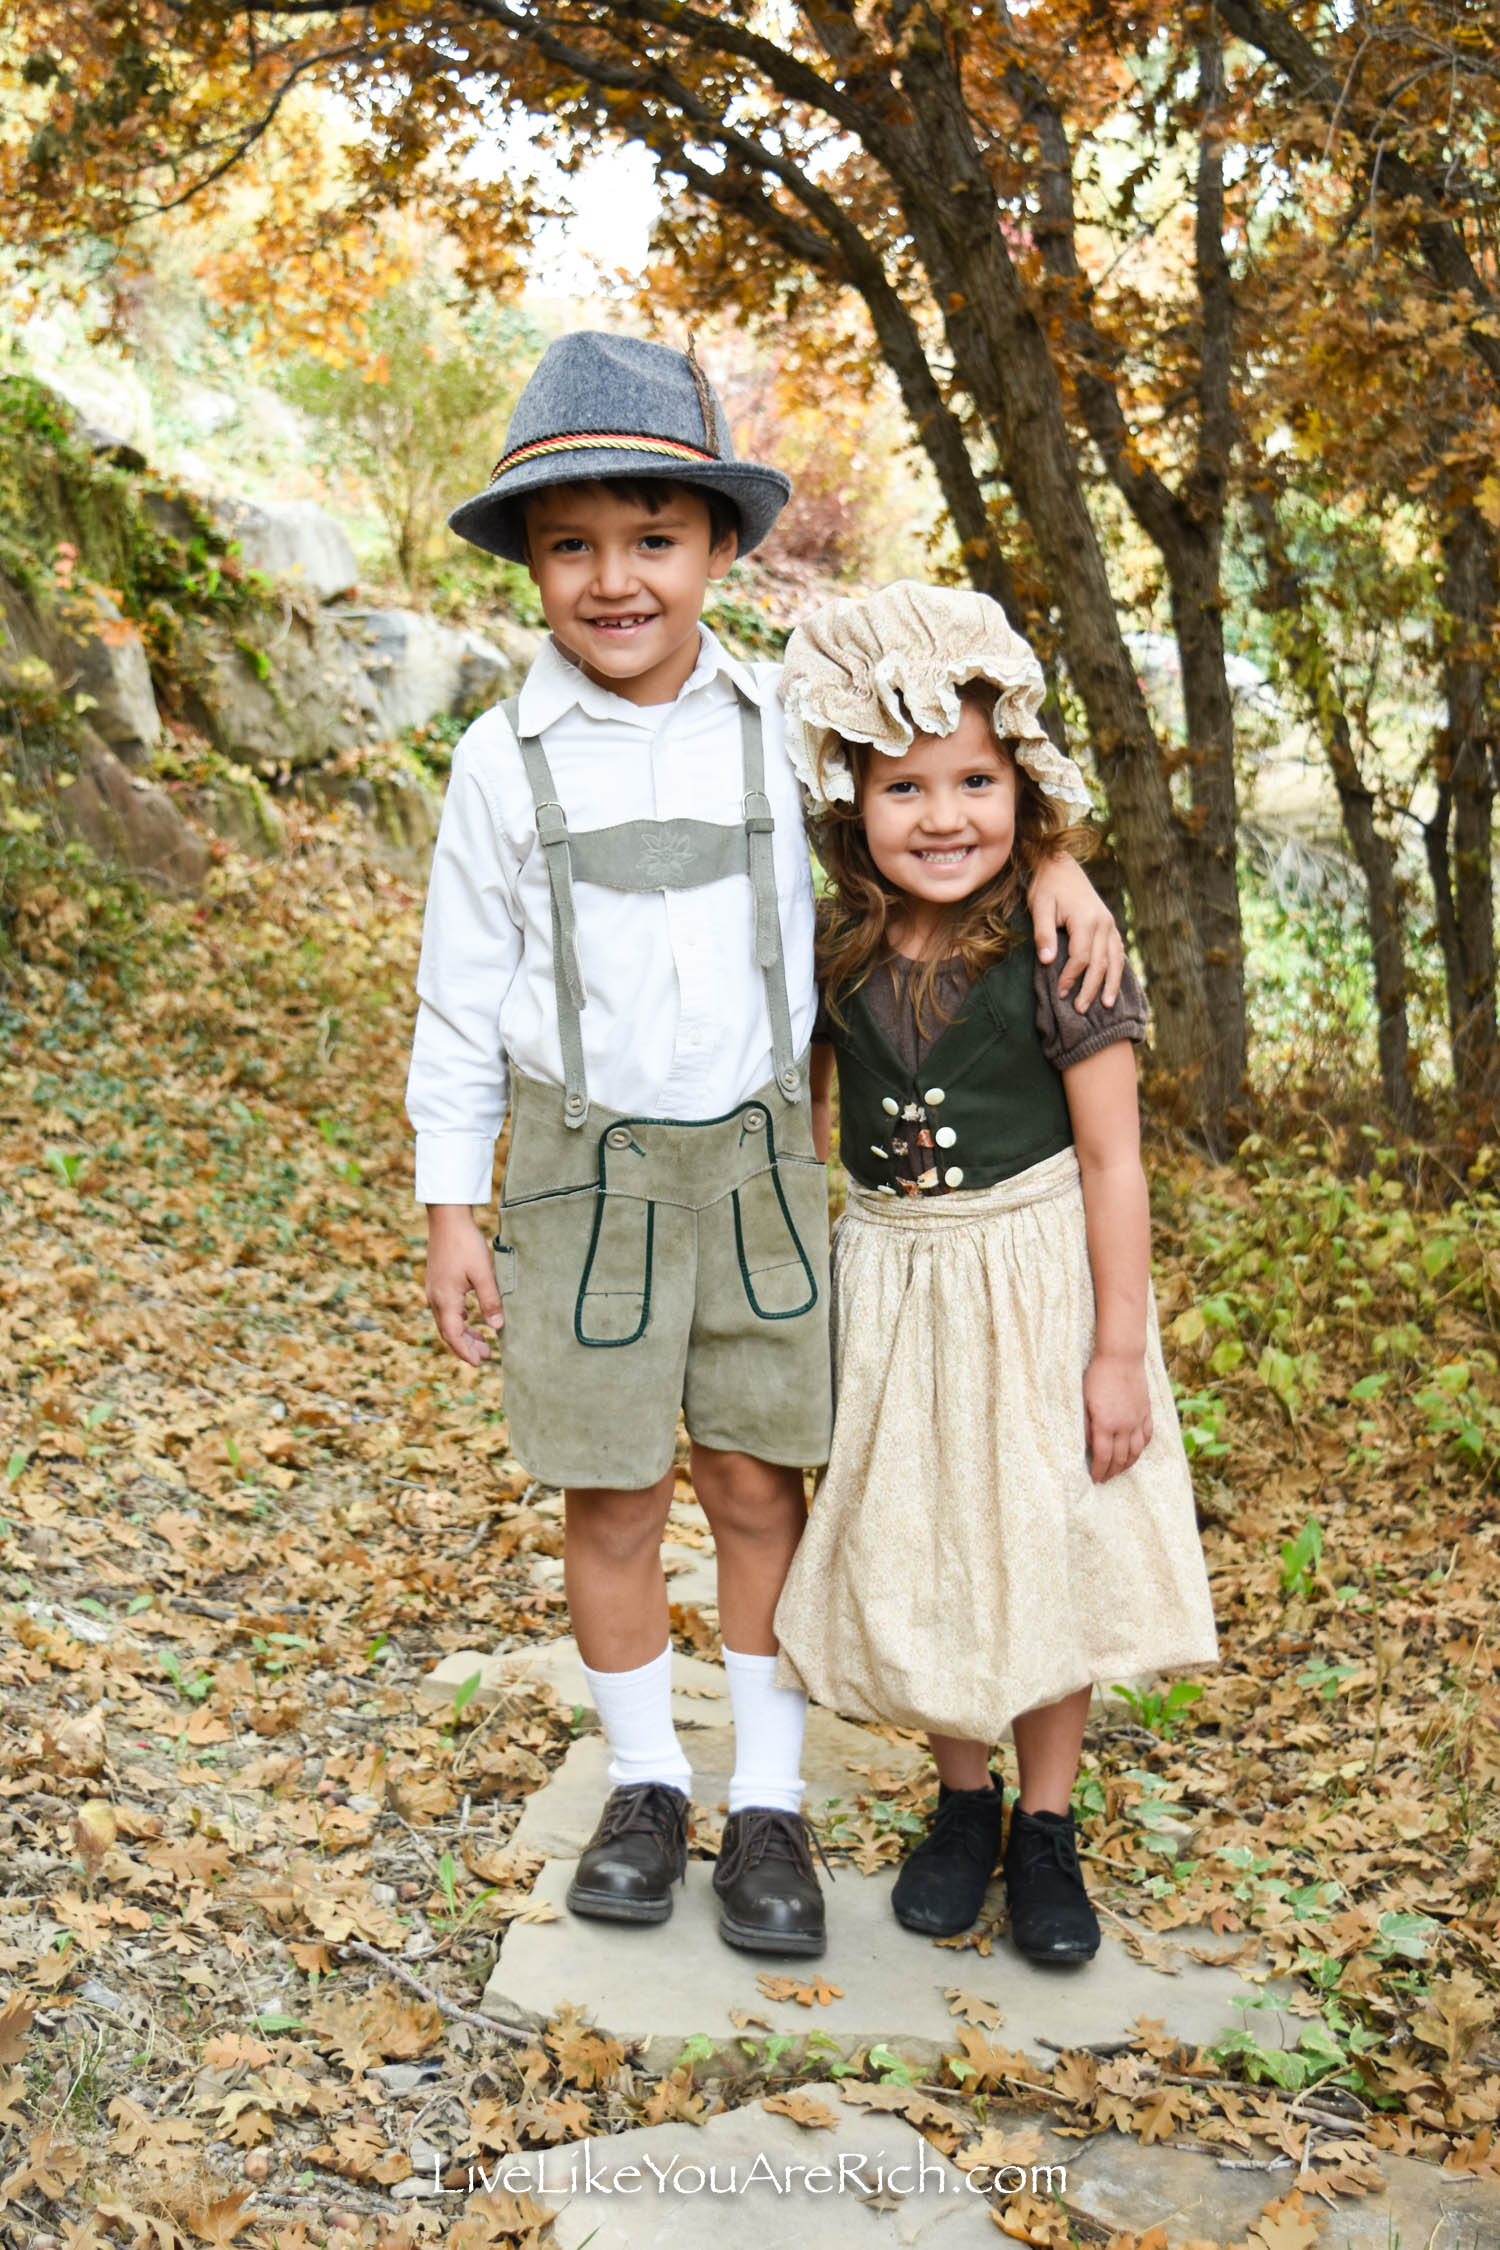 fun halloween costume for ages 2-5